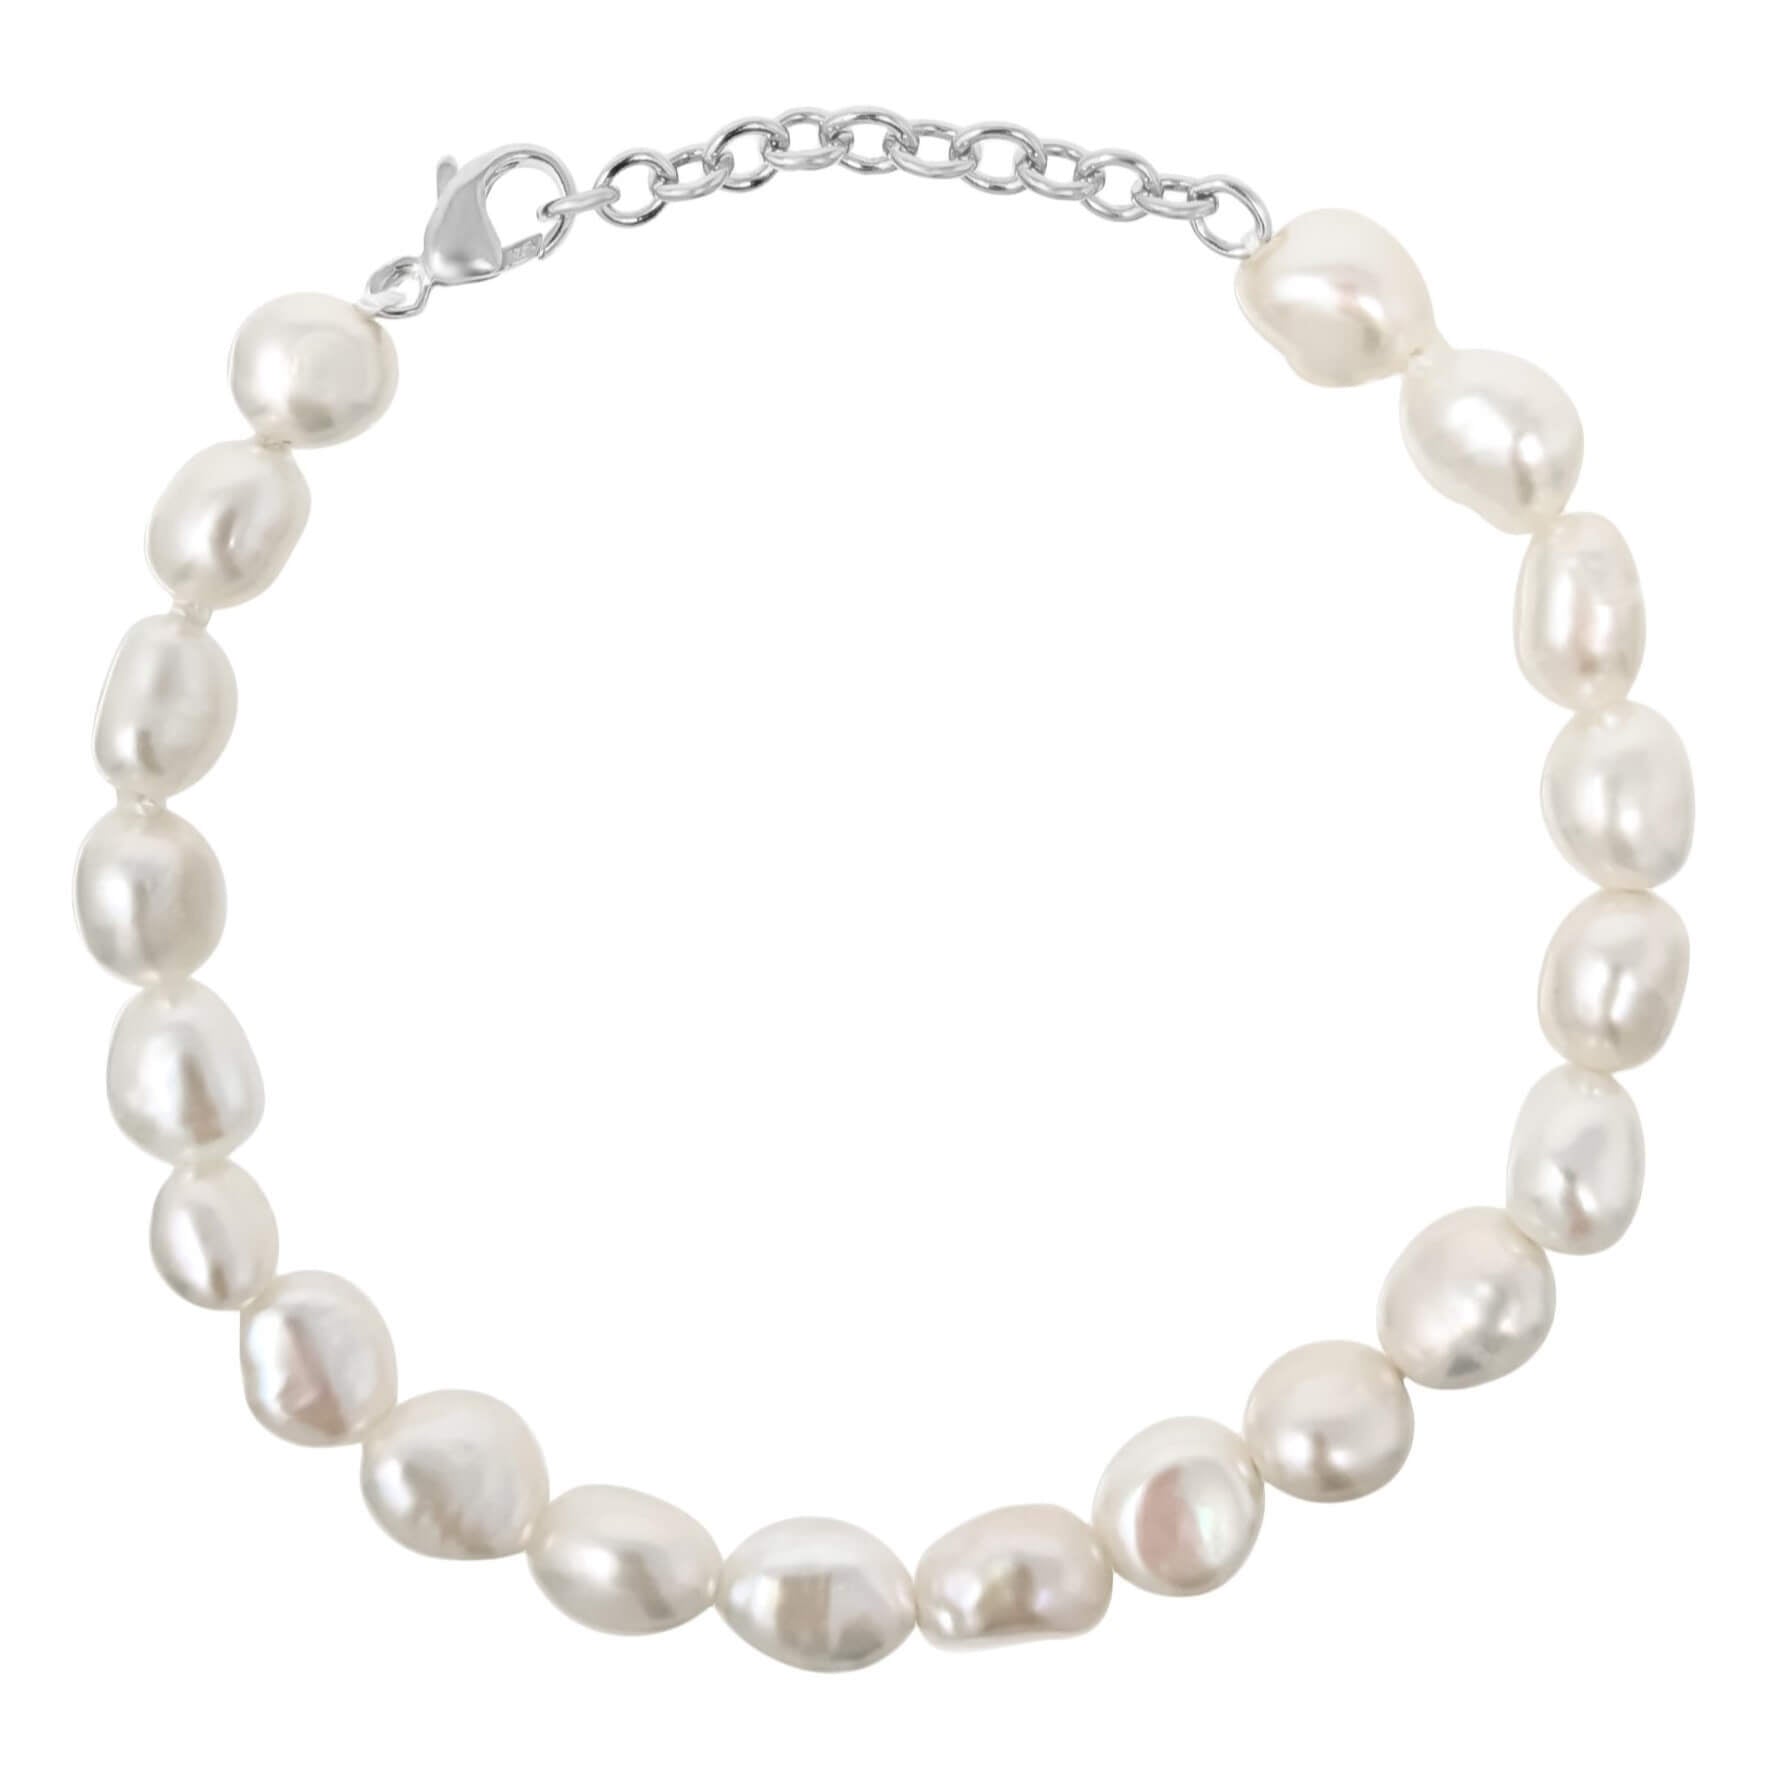 Small baroque pearl adjustable sterling silver bracelet on white background